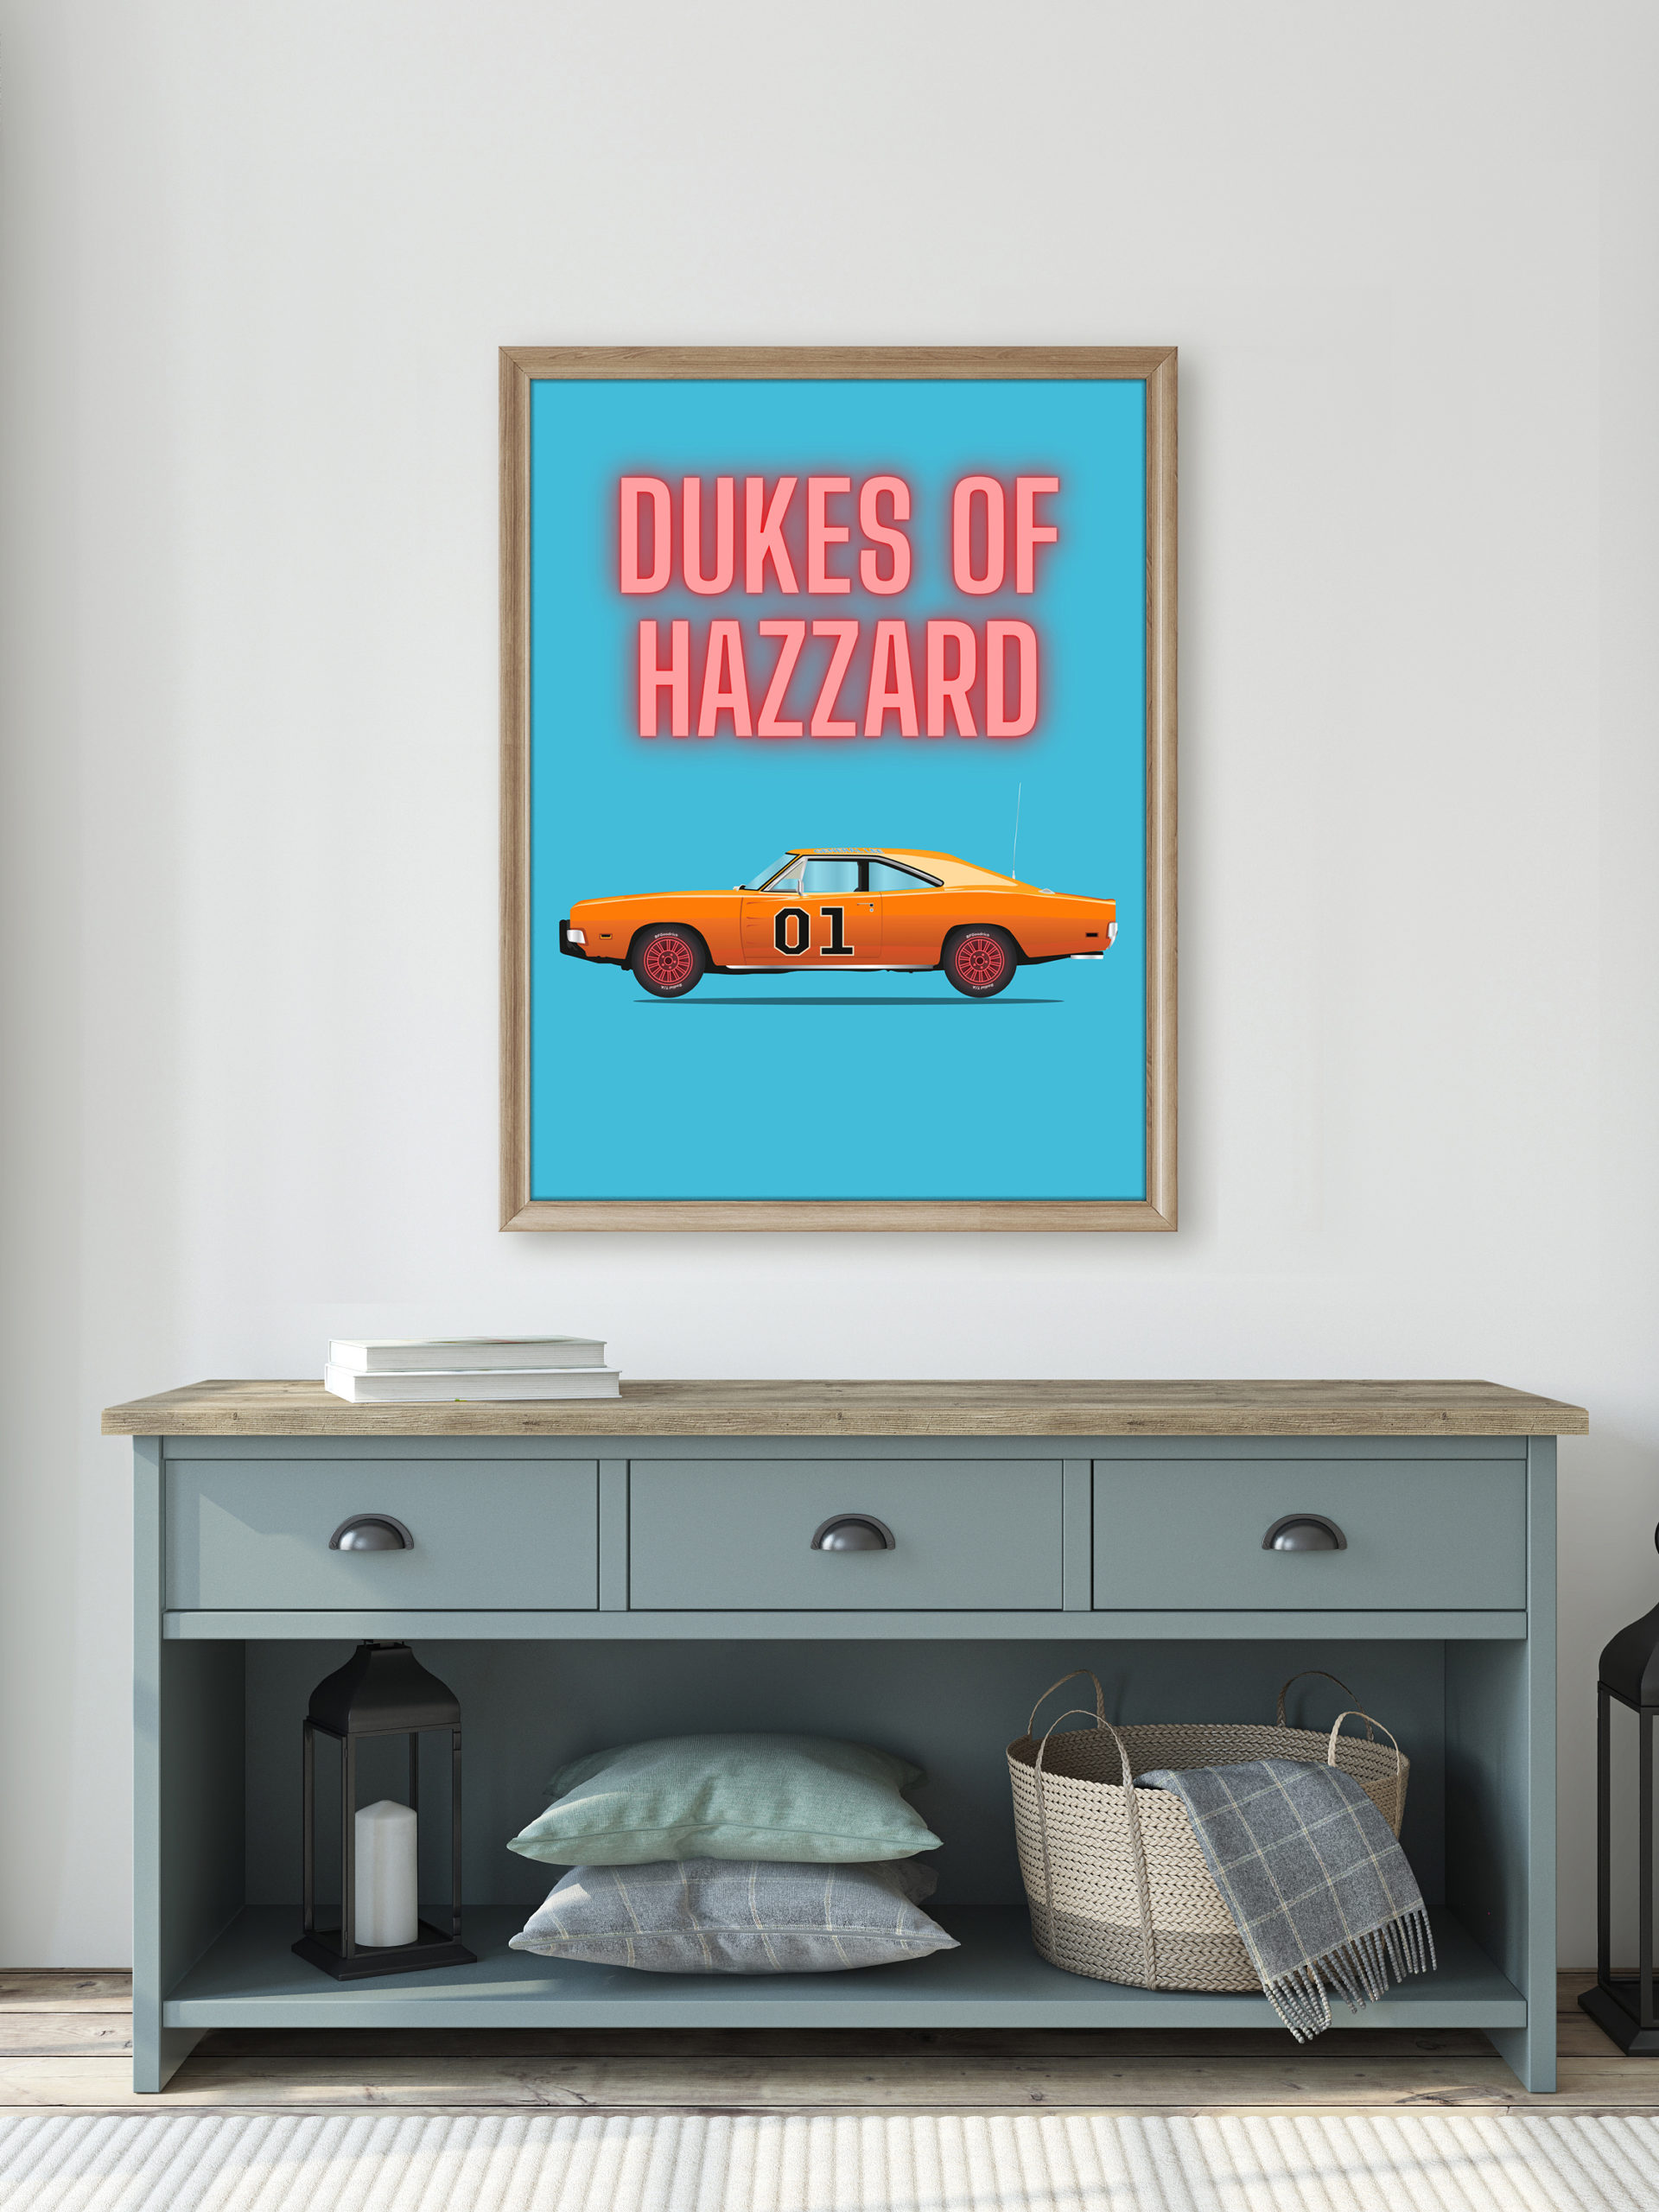 Dukes of Hazard Car poster on wall